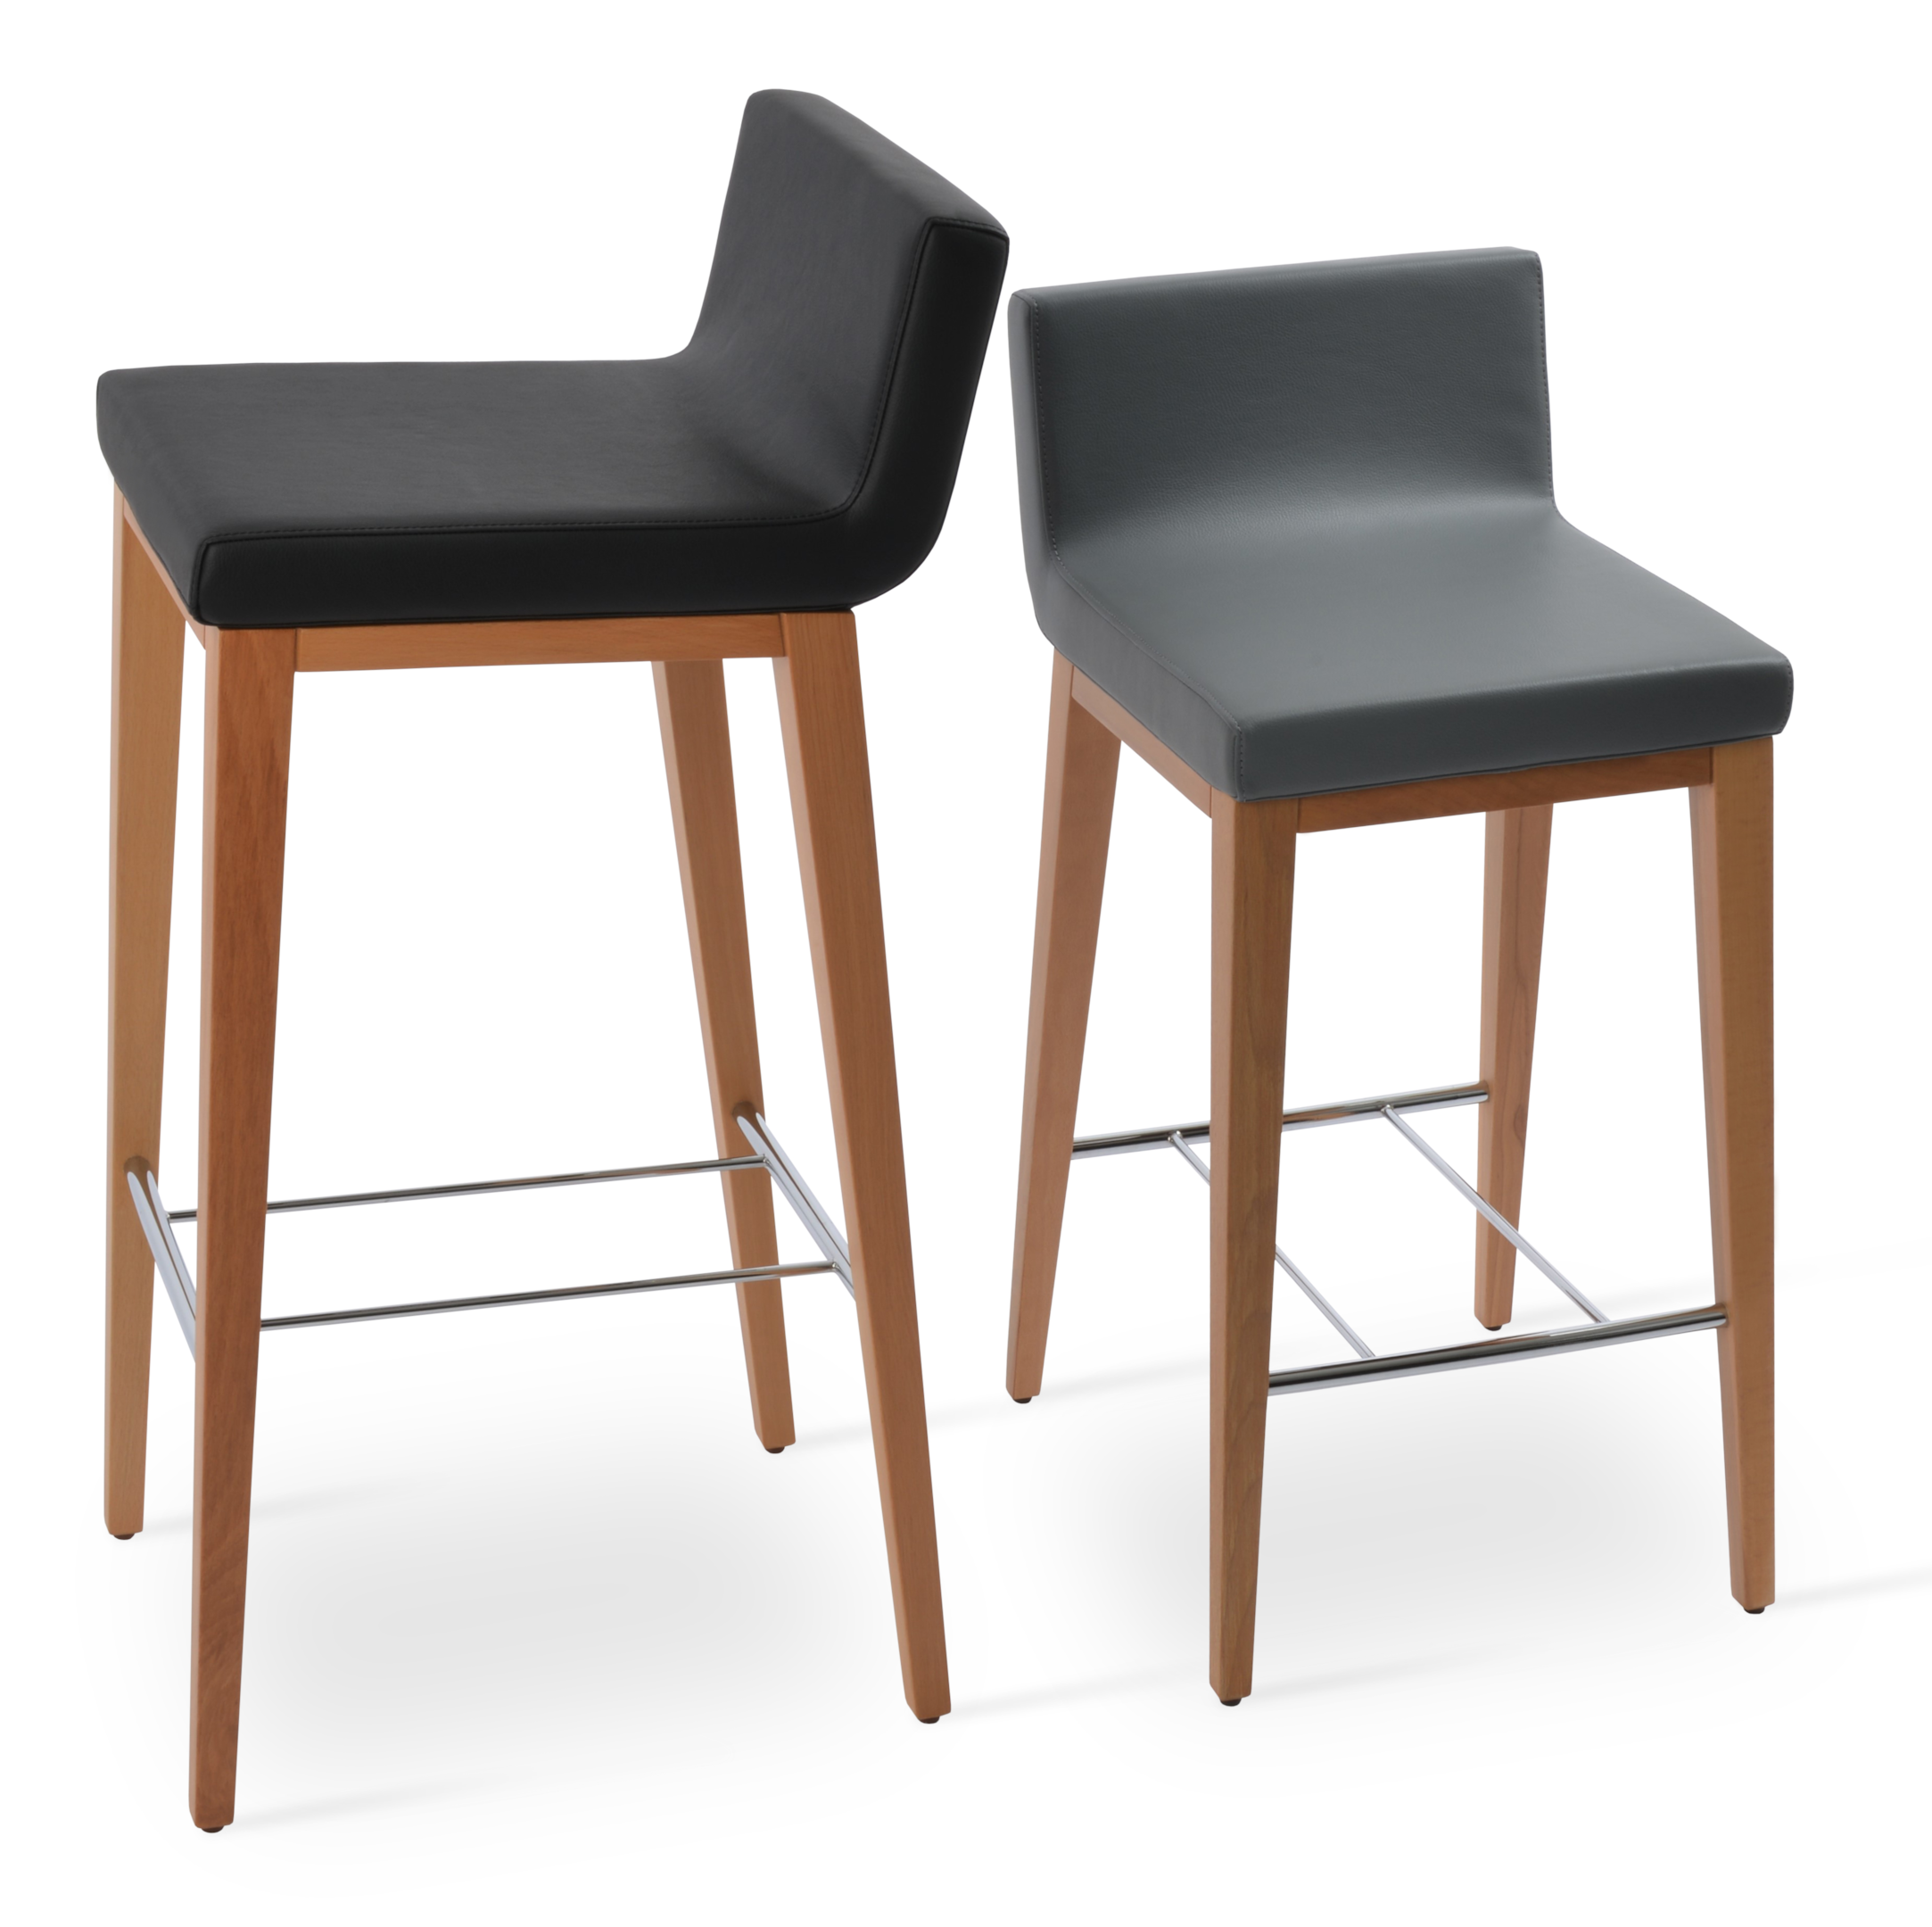 Variety of bar chairs in Canada